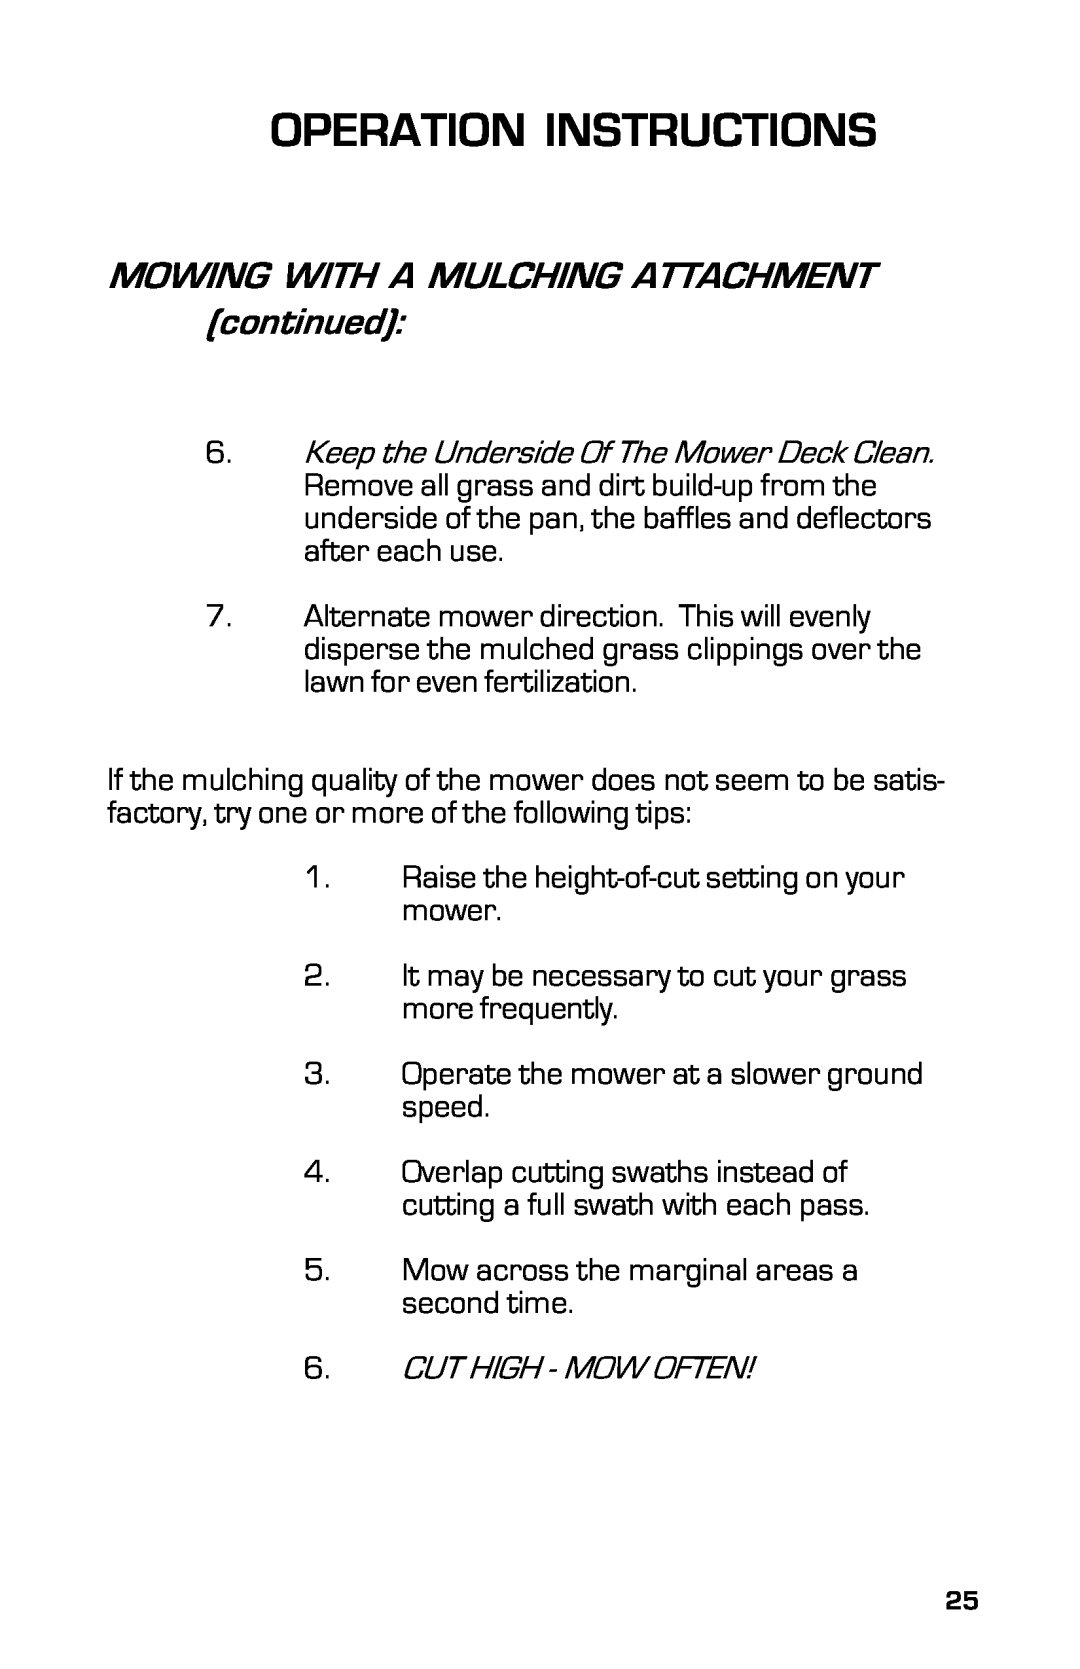 Dixon 13639-0702, 2003 manual Operation Instructions, MOWING WITH A MULCHING ATTACHMENT continued 